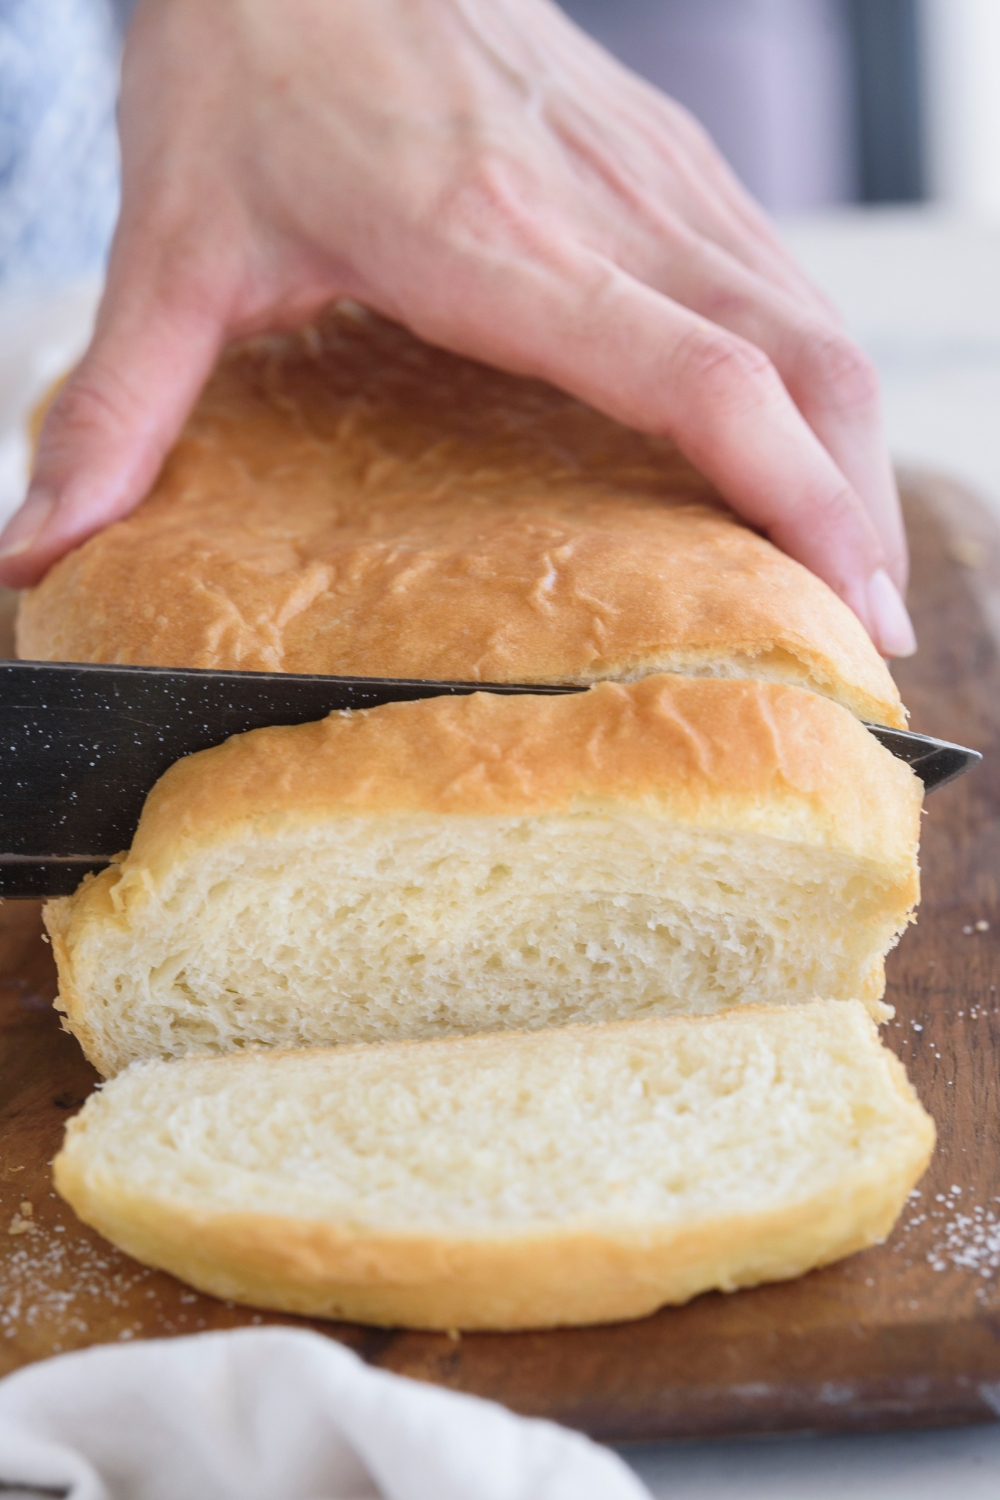 A loaf of bread being sliced.